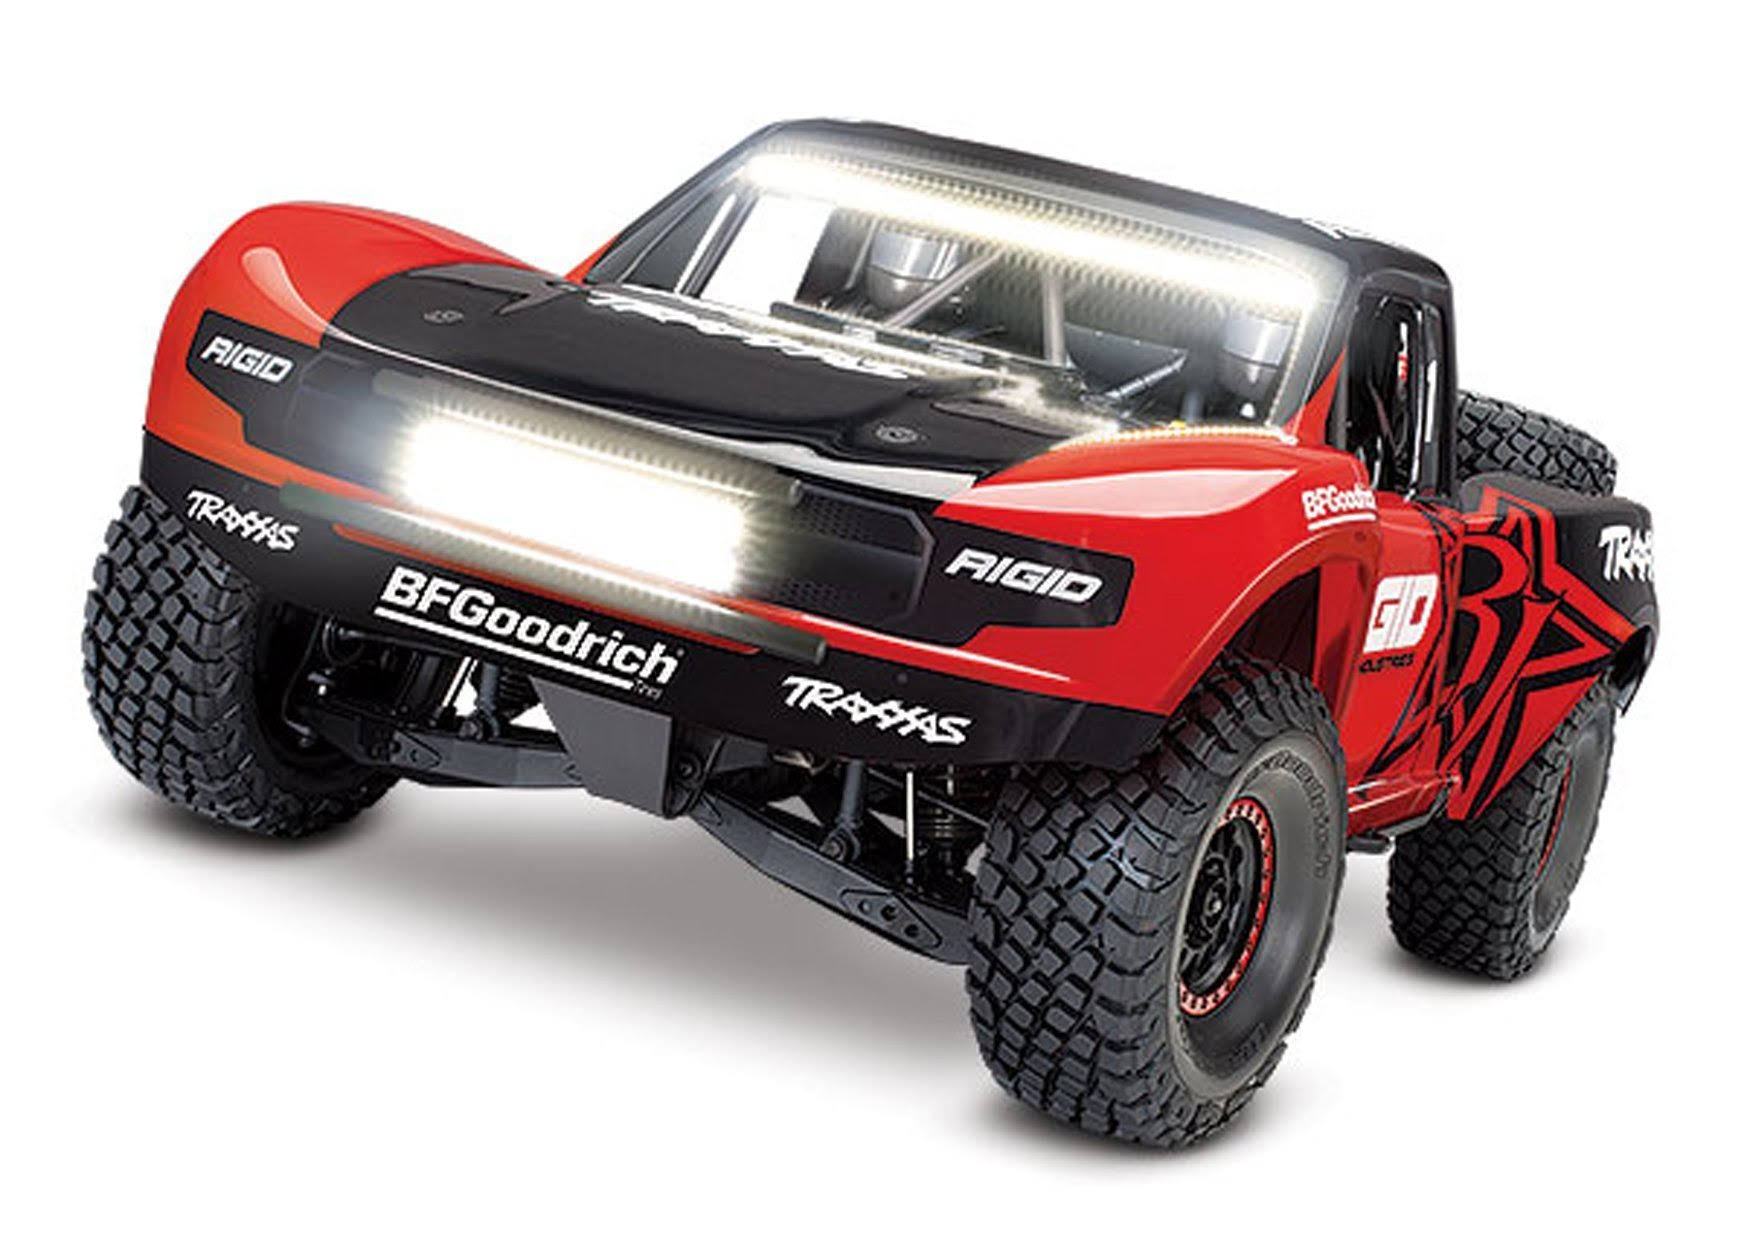 Traxxas 85086-4 Unlimited Desert Racer 1/7 4WD Vxl Brushless Short Course Truck with Light Kit (Rigid Edition)